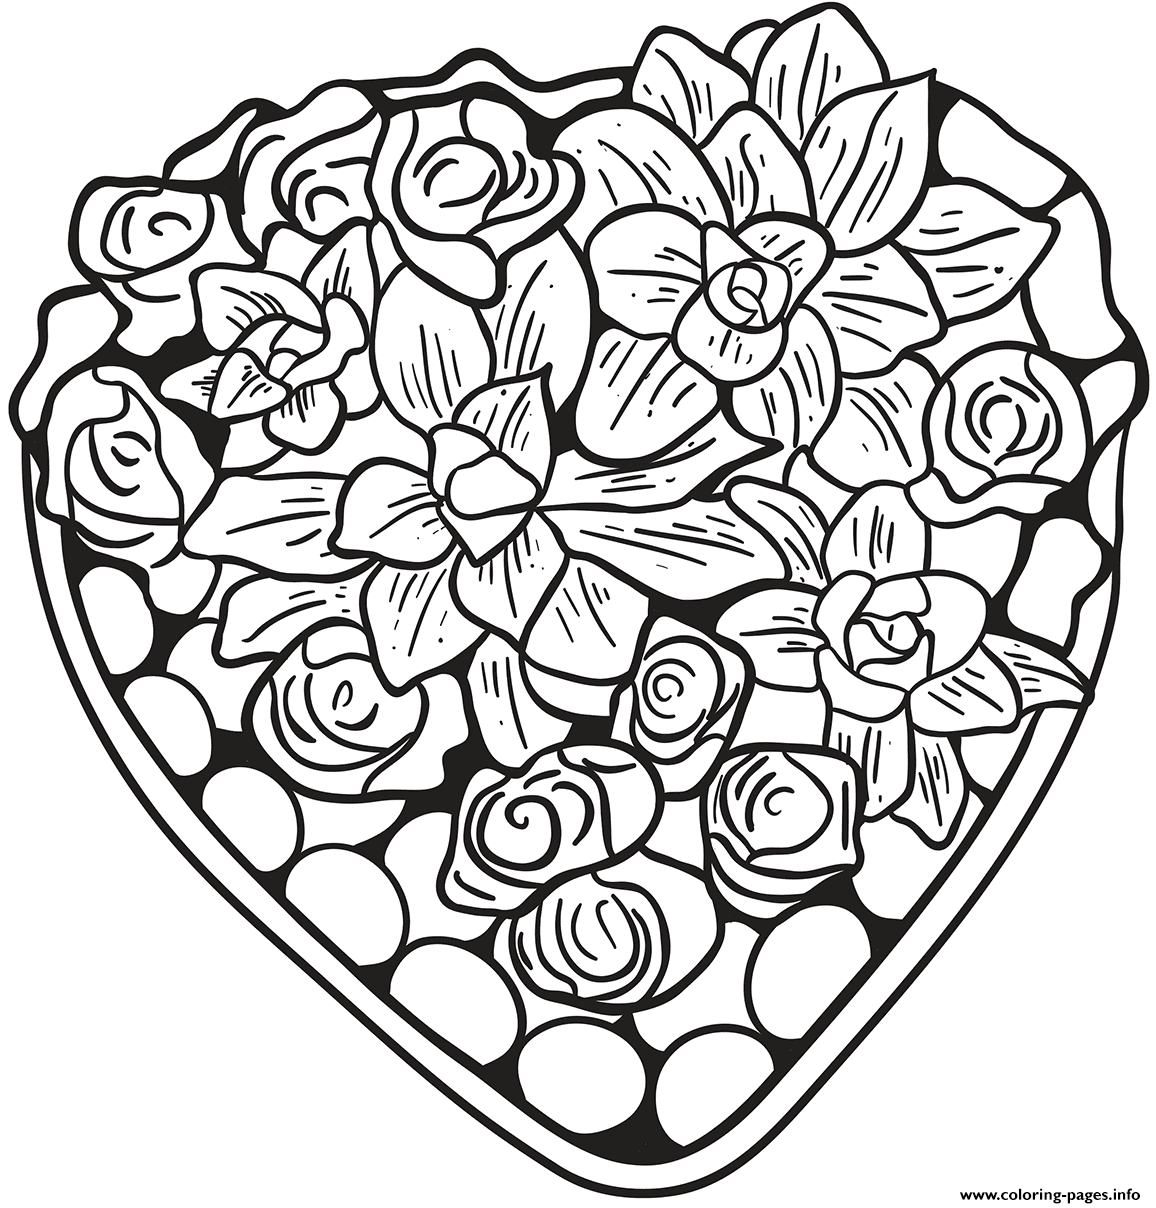 Heart Made Of Flowers coloring